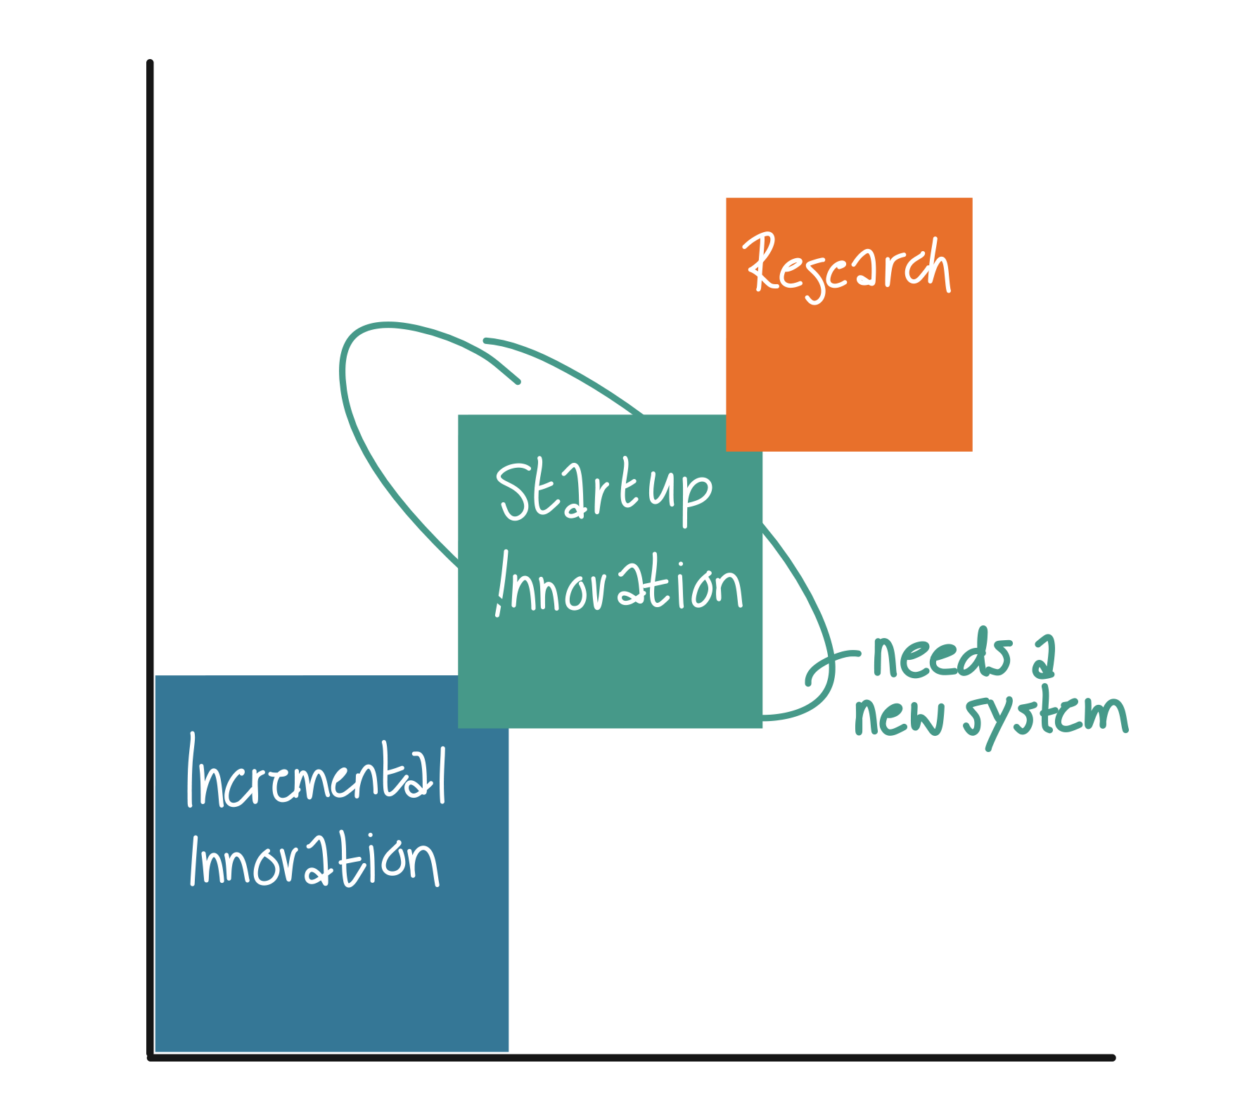 Incremental innovation versus Disruptive innovation. Since the business goals are different, we need a different way of managing as well.
